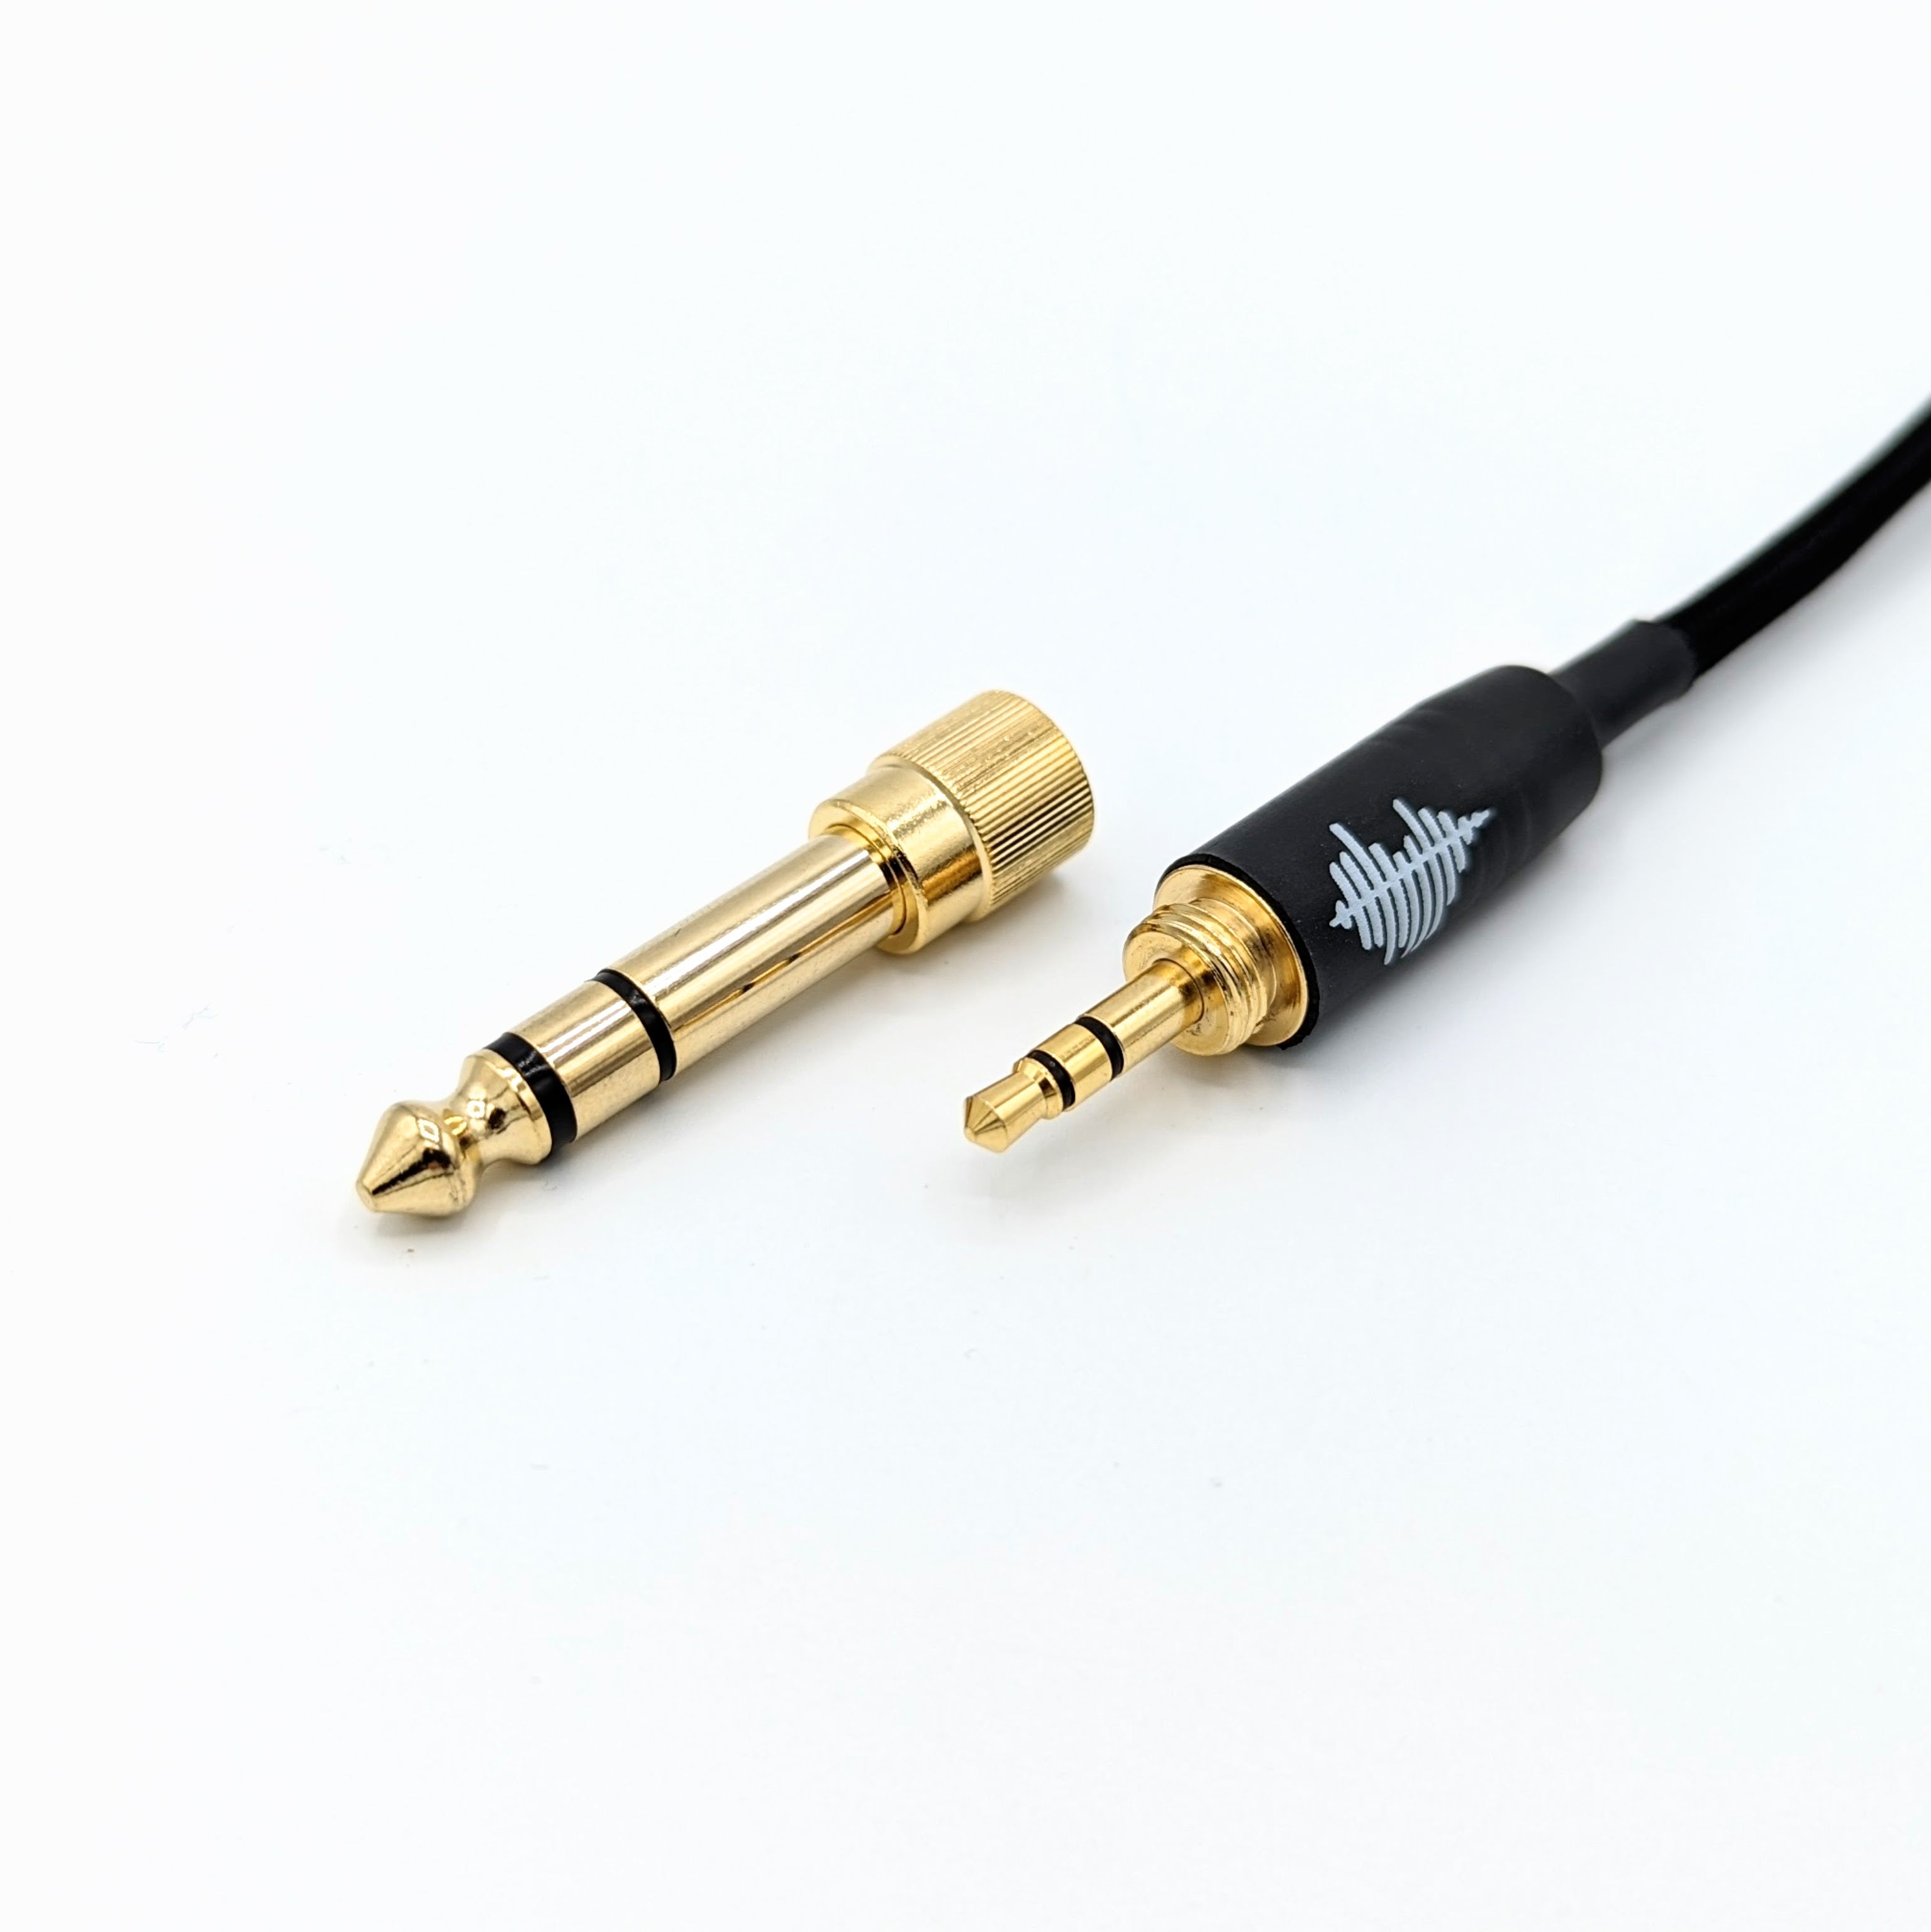 Dual Lemo 2-pin Cable for Focal Utopia – Hart Audio Cables